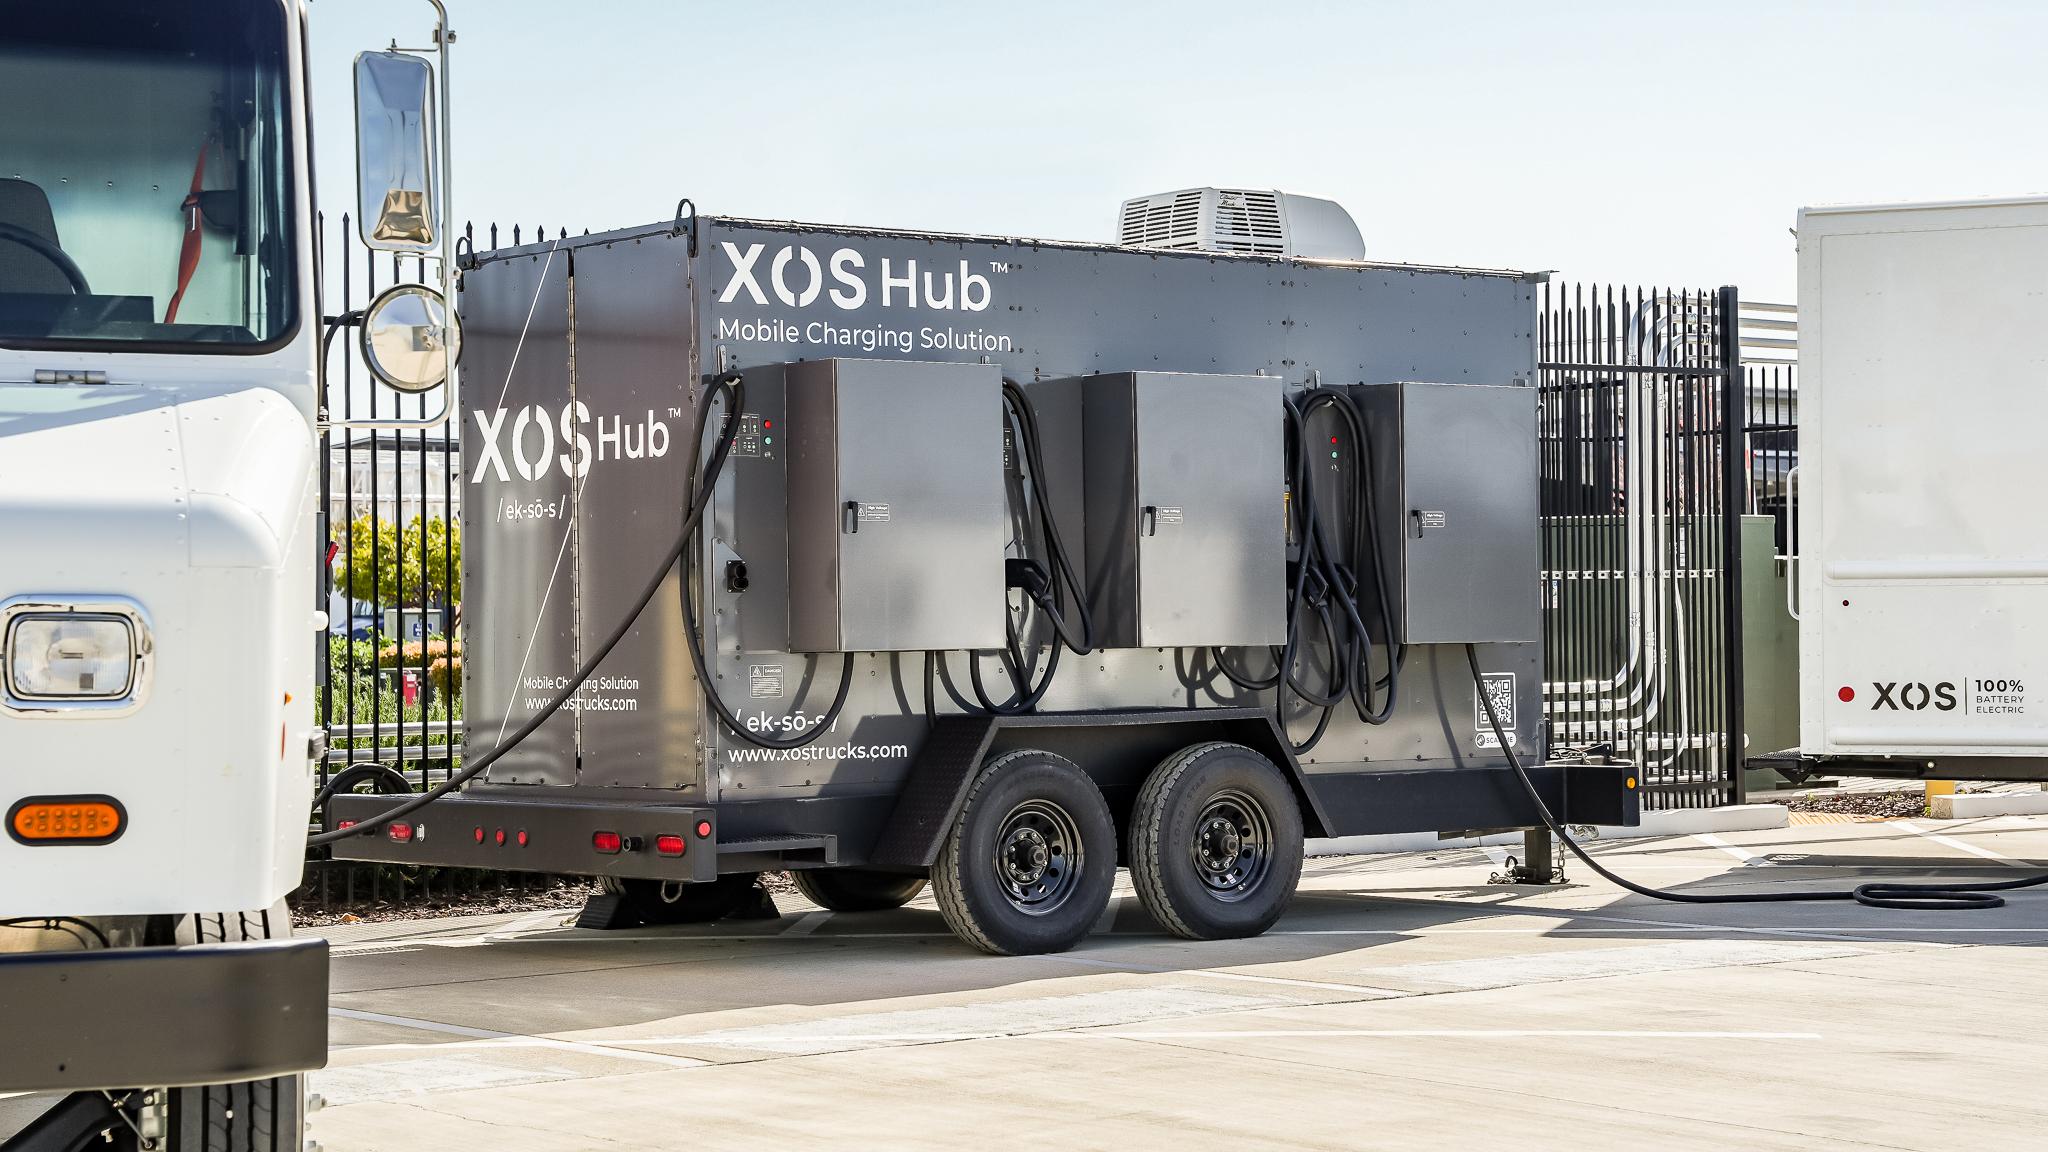 The next generation Xos Hub features an energy capacity of 390 kWh and an increase in charger output by 60%, enabling faster charge times for EVs